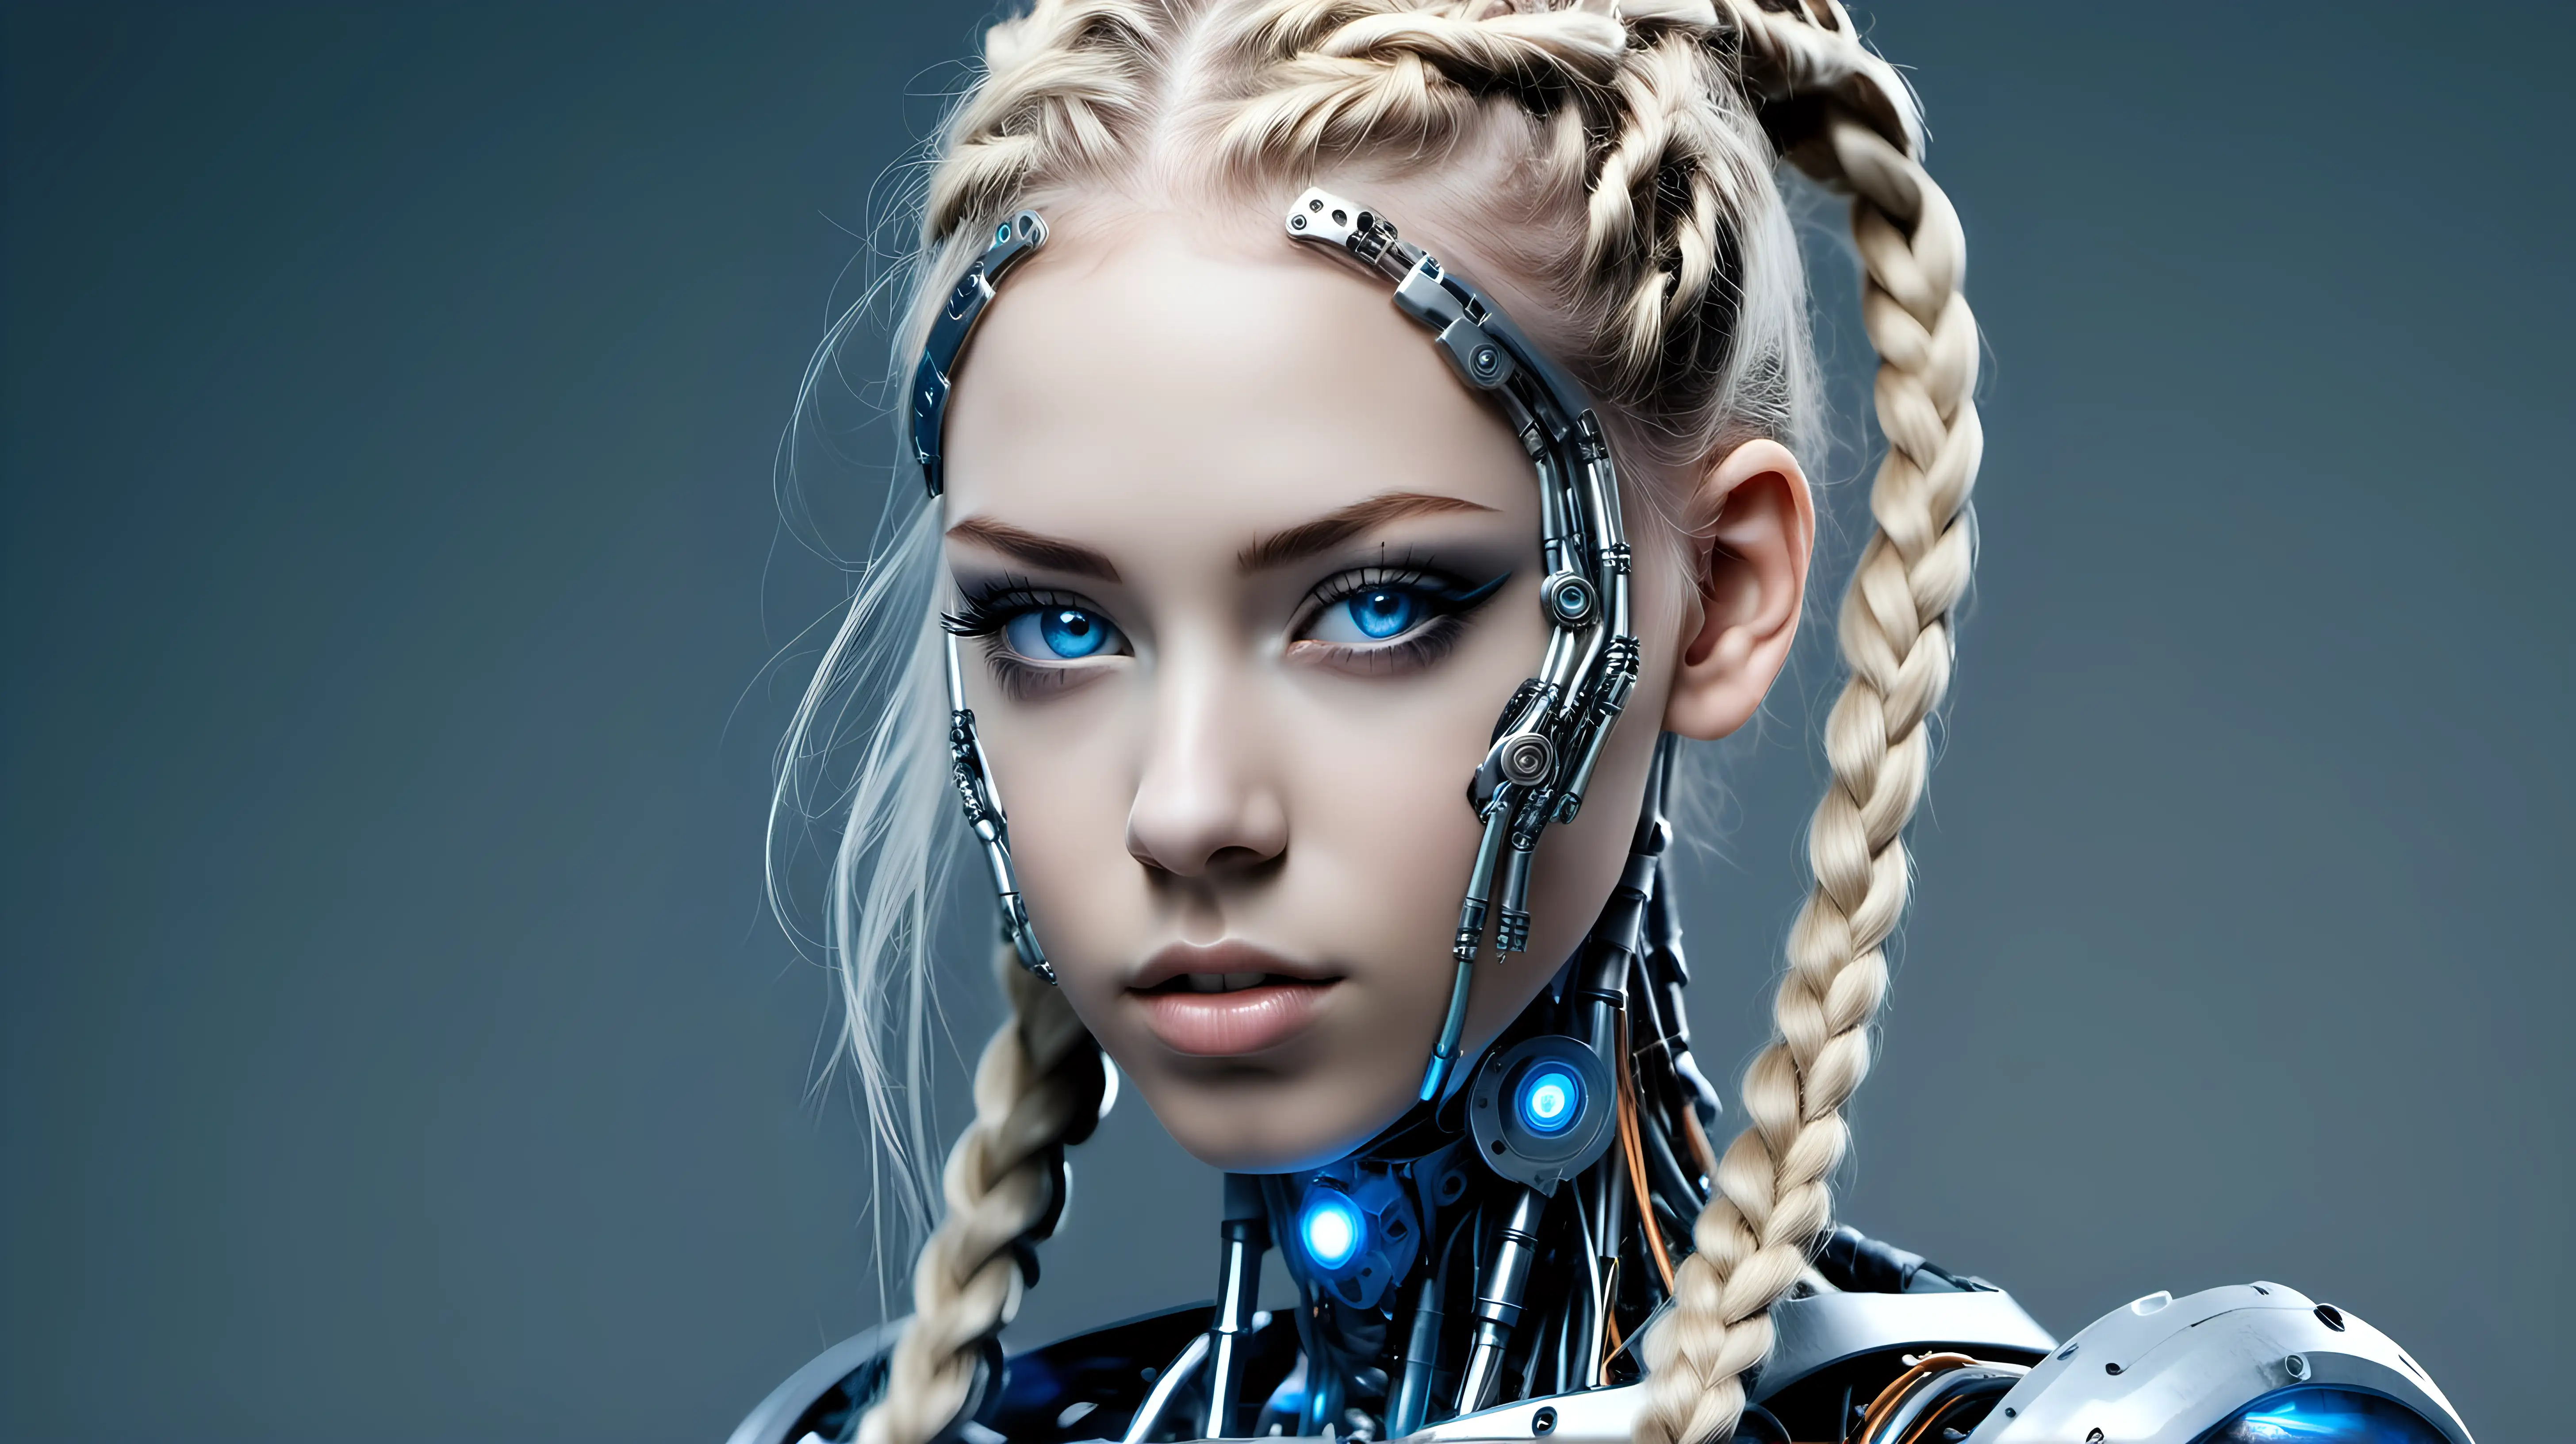 Gorgeous cyborg woman, 18 years old. She has a cyborg face, but she is extremely beautiful. Blonde braids, blue eyes.